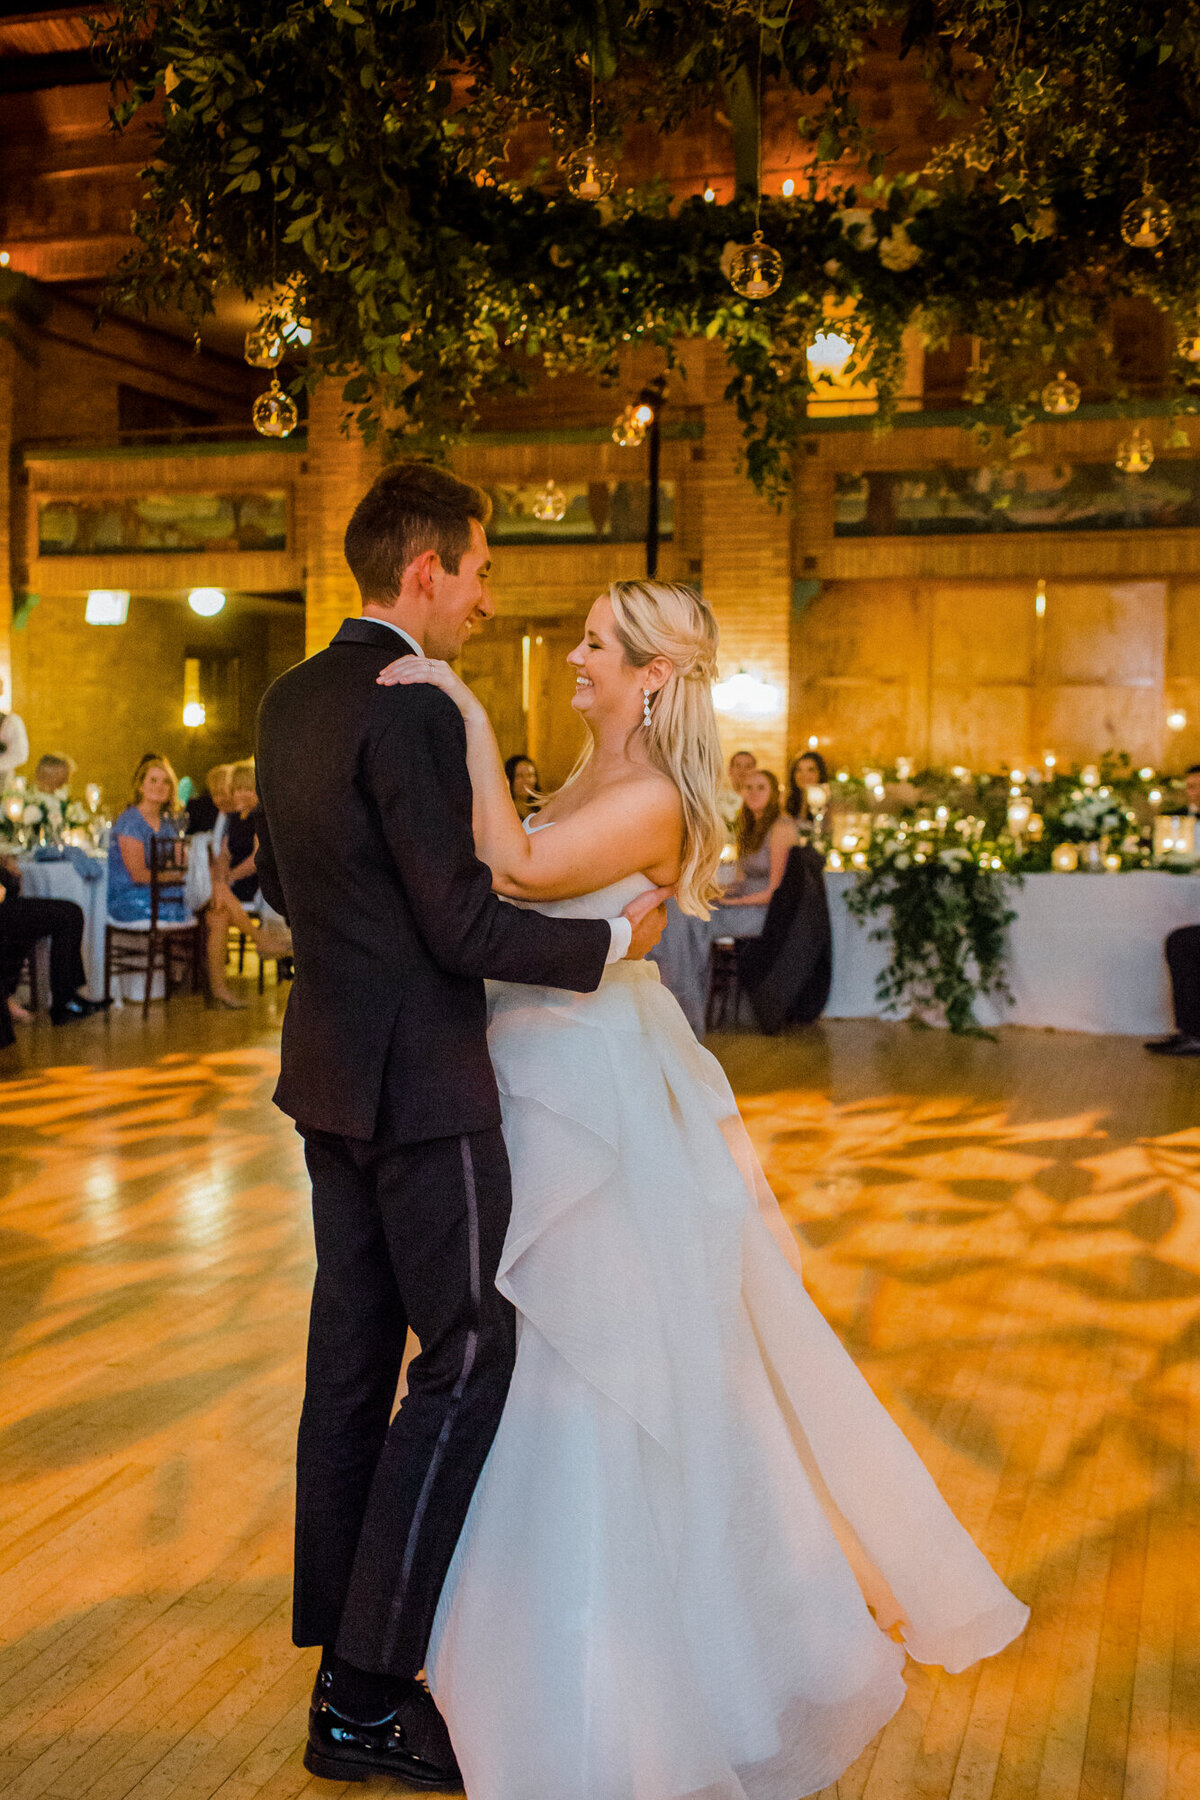 A beautiful first dance at Cafe Brauer in Chicago